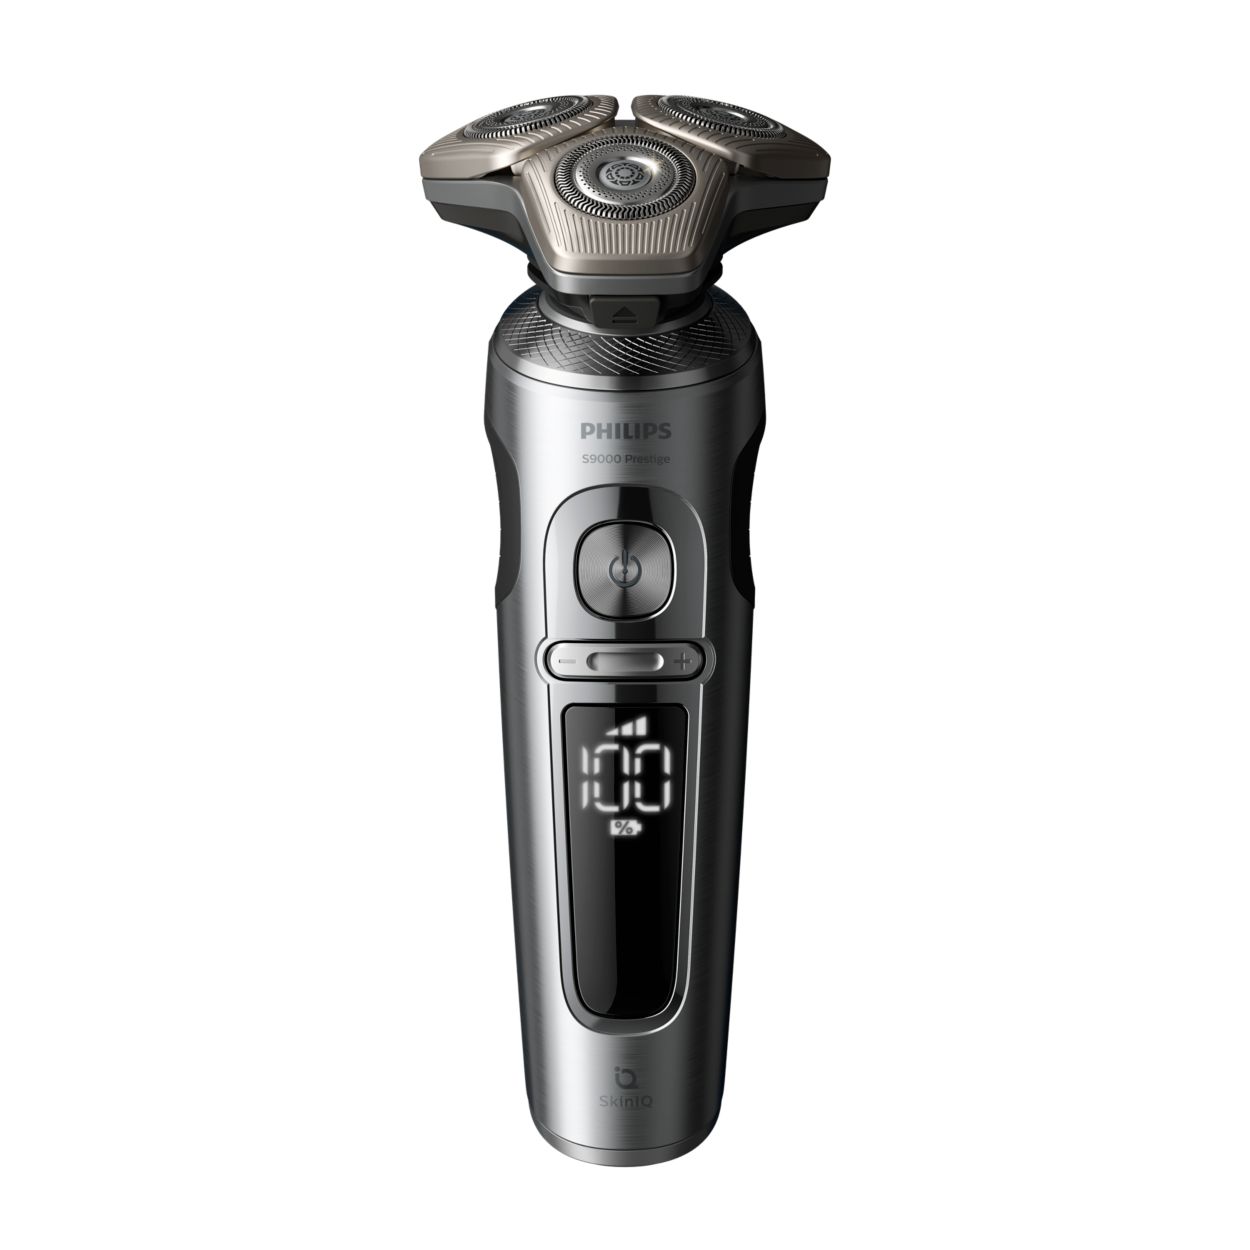 Shaver S9000 Prestige Wet & Dry Electric shaver with SkinIQ SP9871